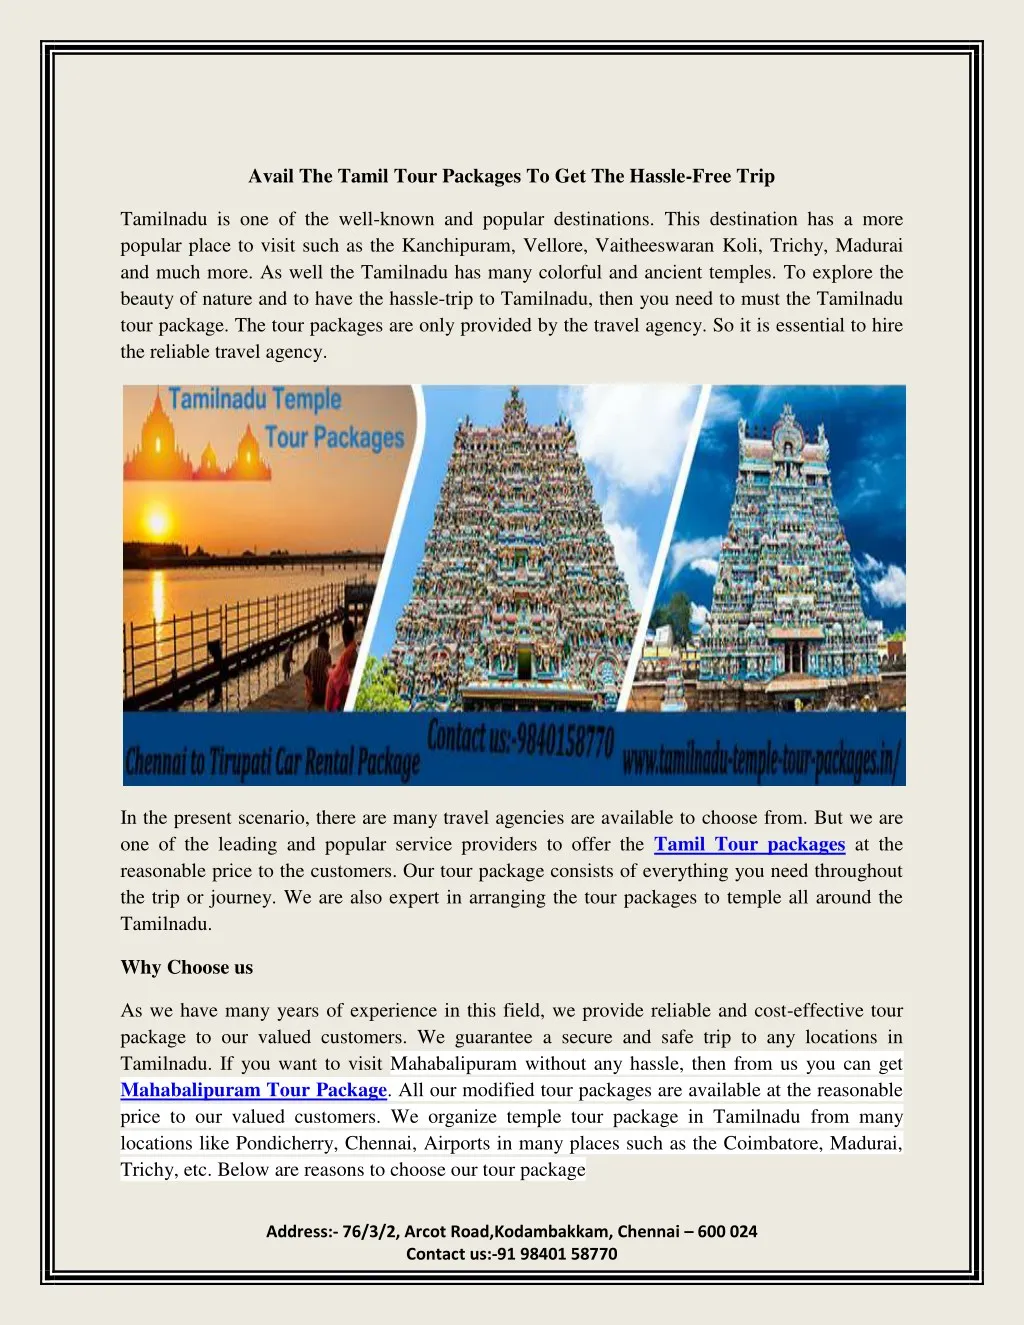 avail the tamil tour packages to get the hassle